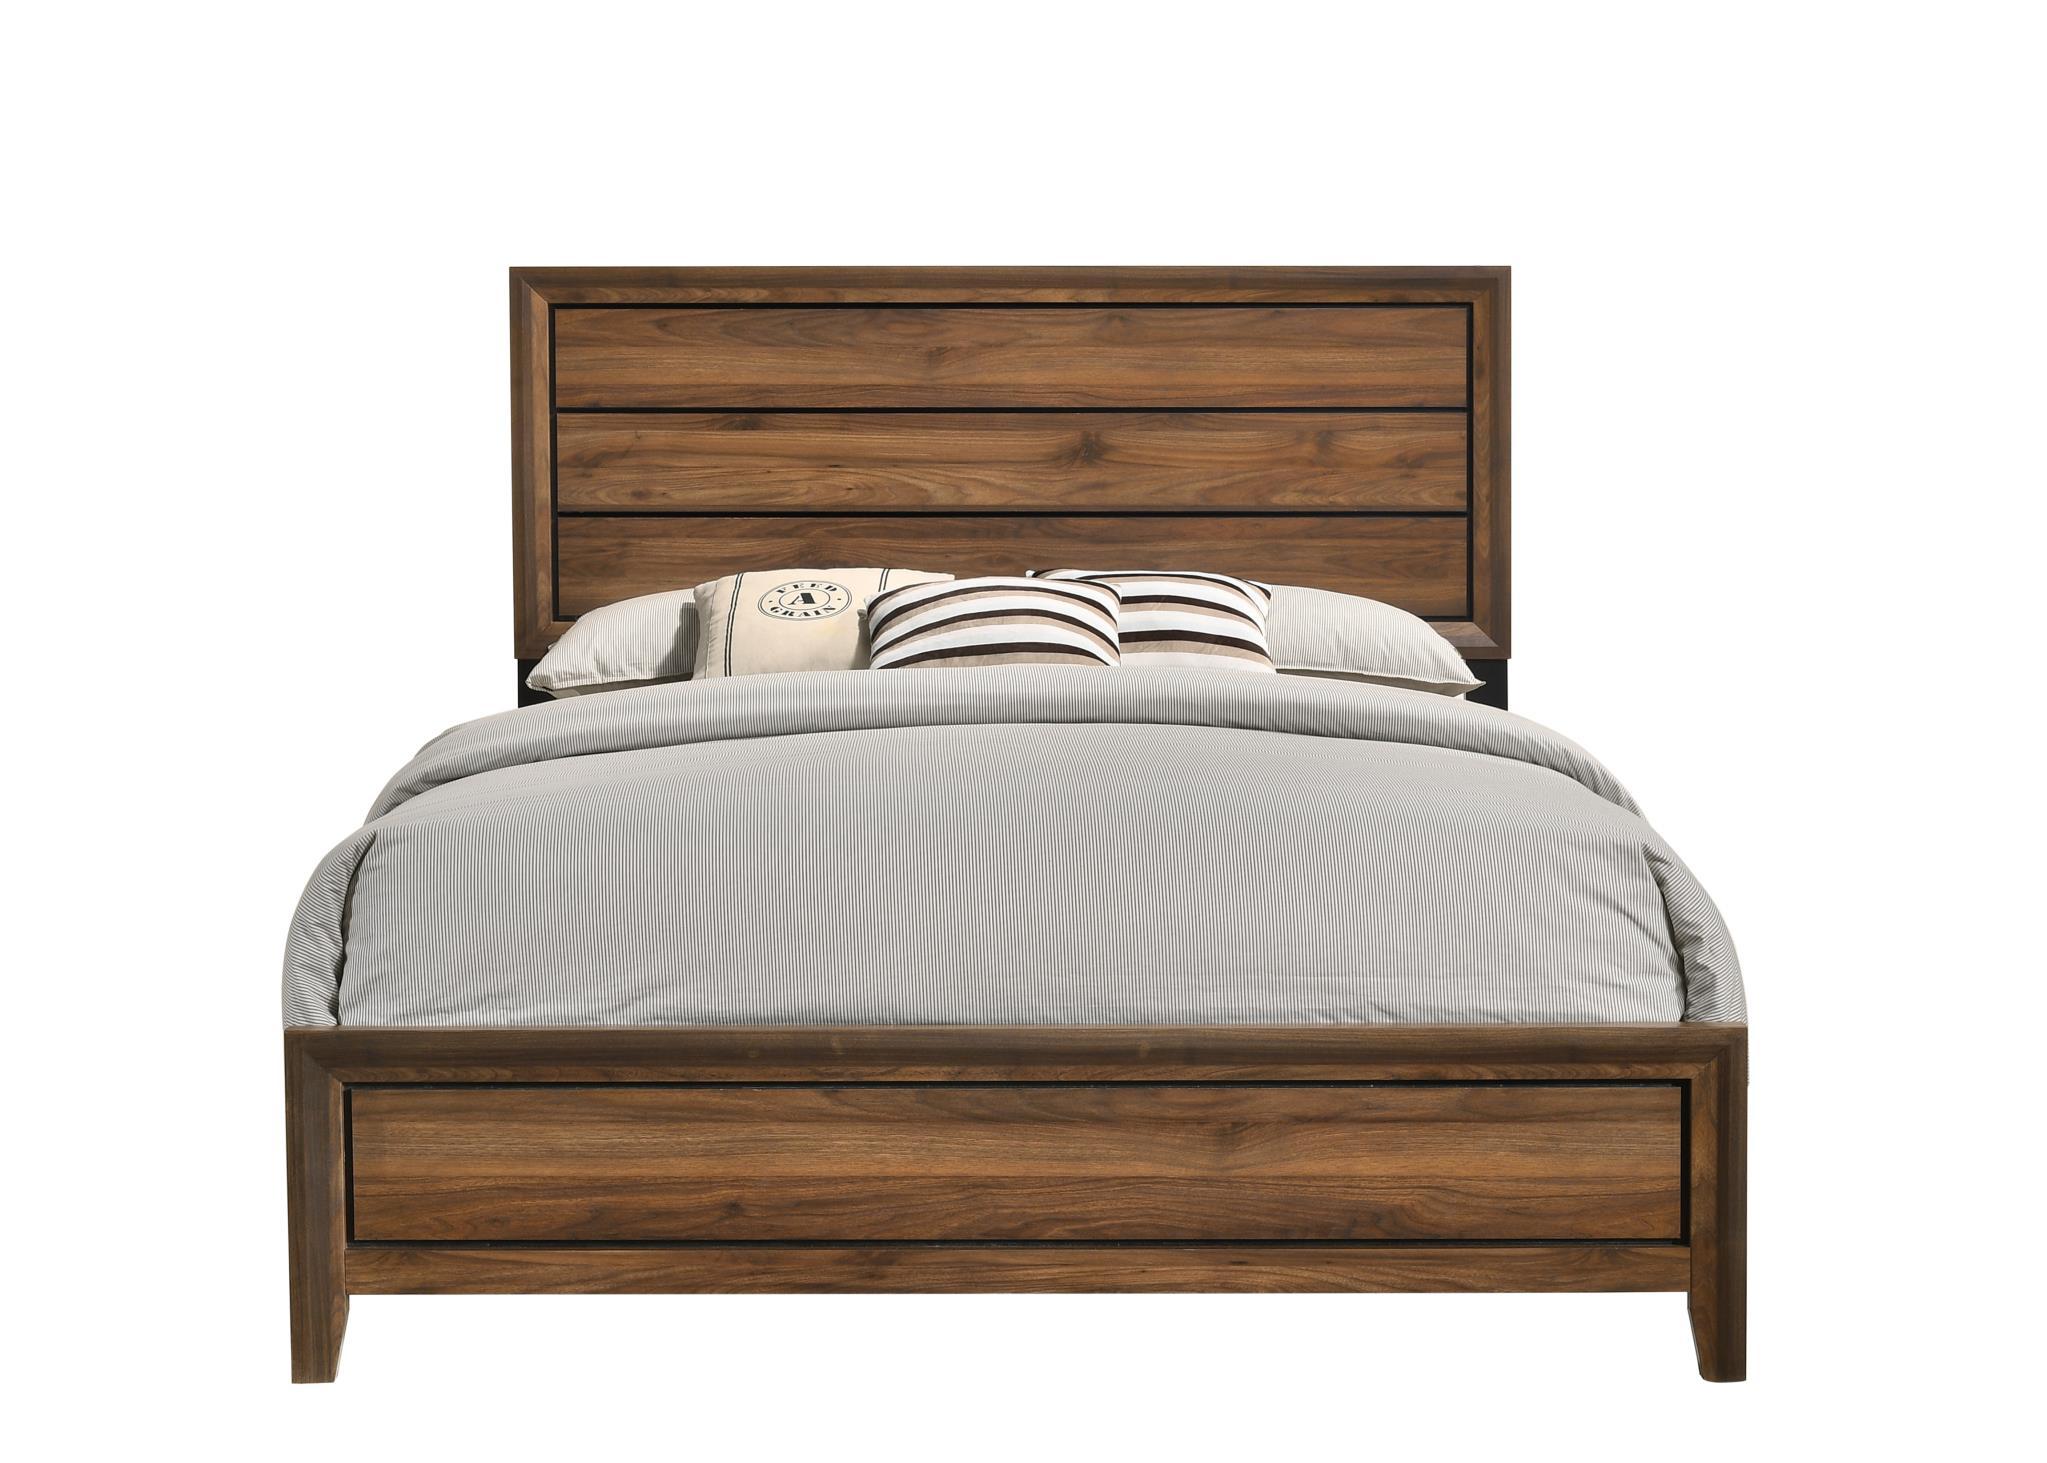 Modern, Transitional Panel Bed KENNEDY 1372-104 1372-104 in Brown 